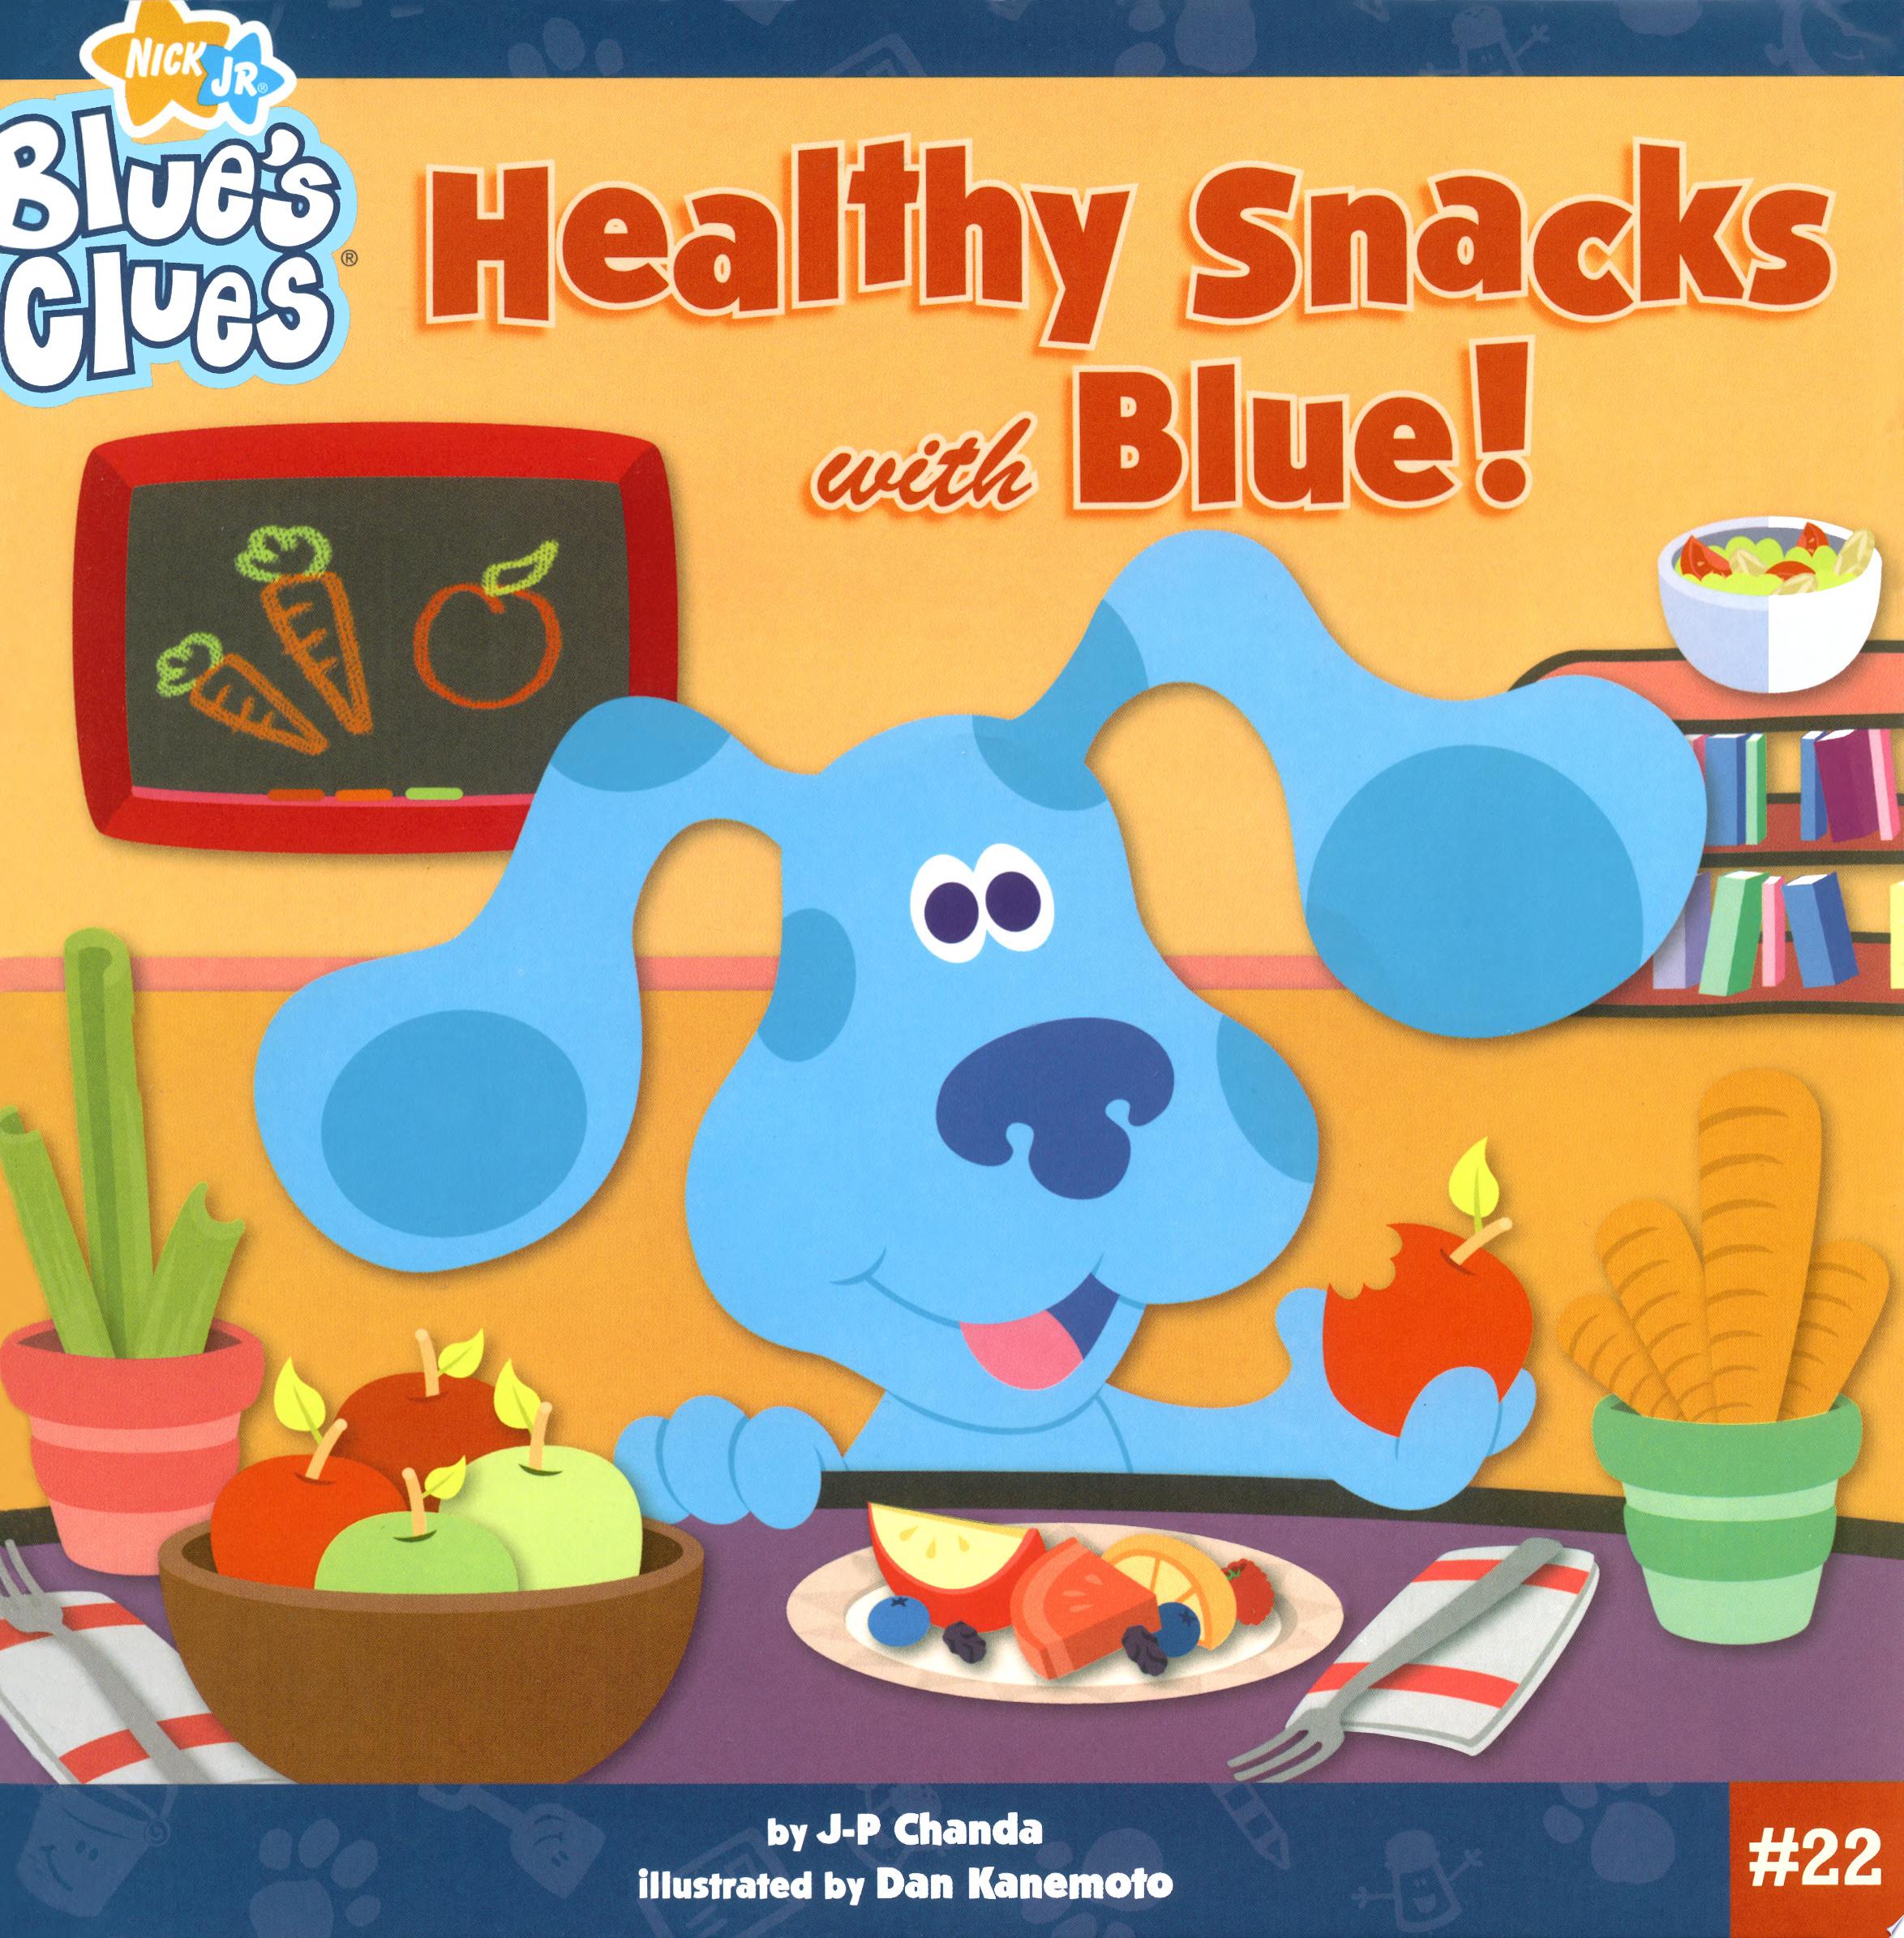 Image for "Healthy Snacks with Blue!"